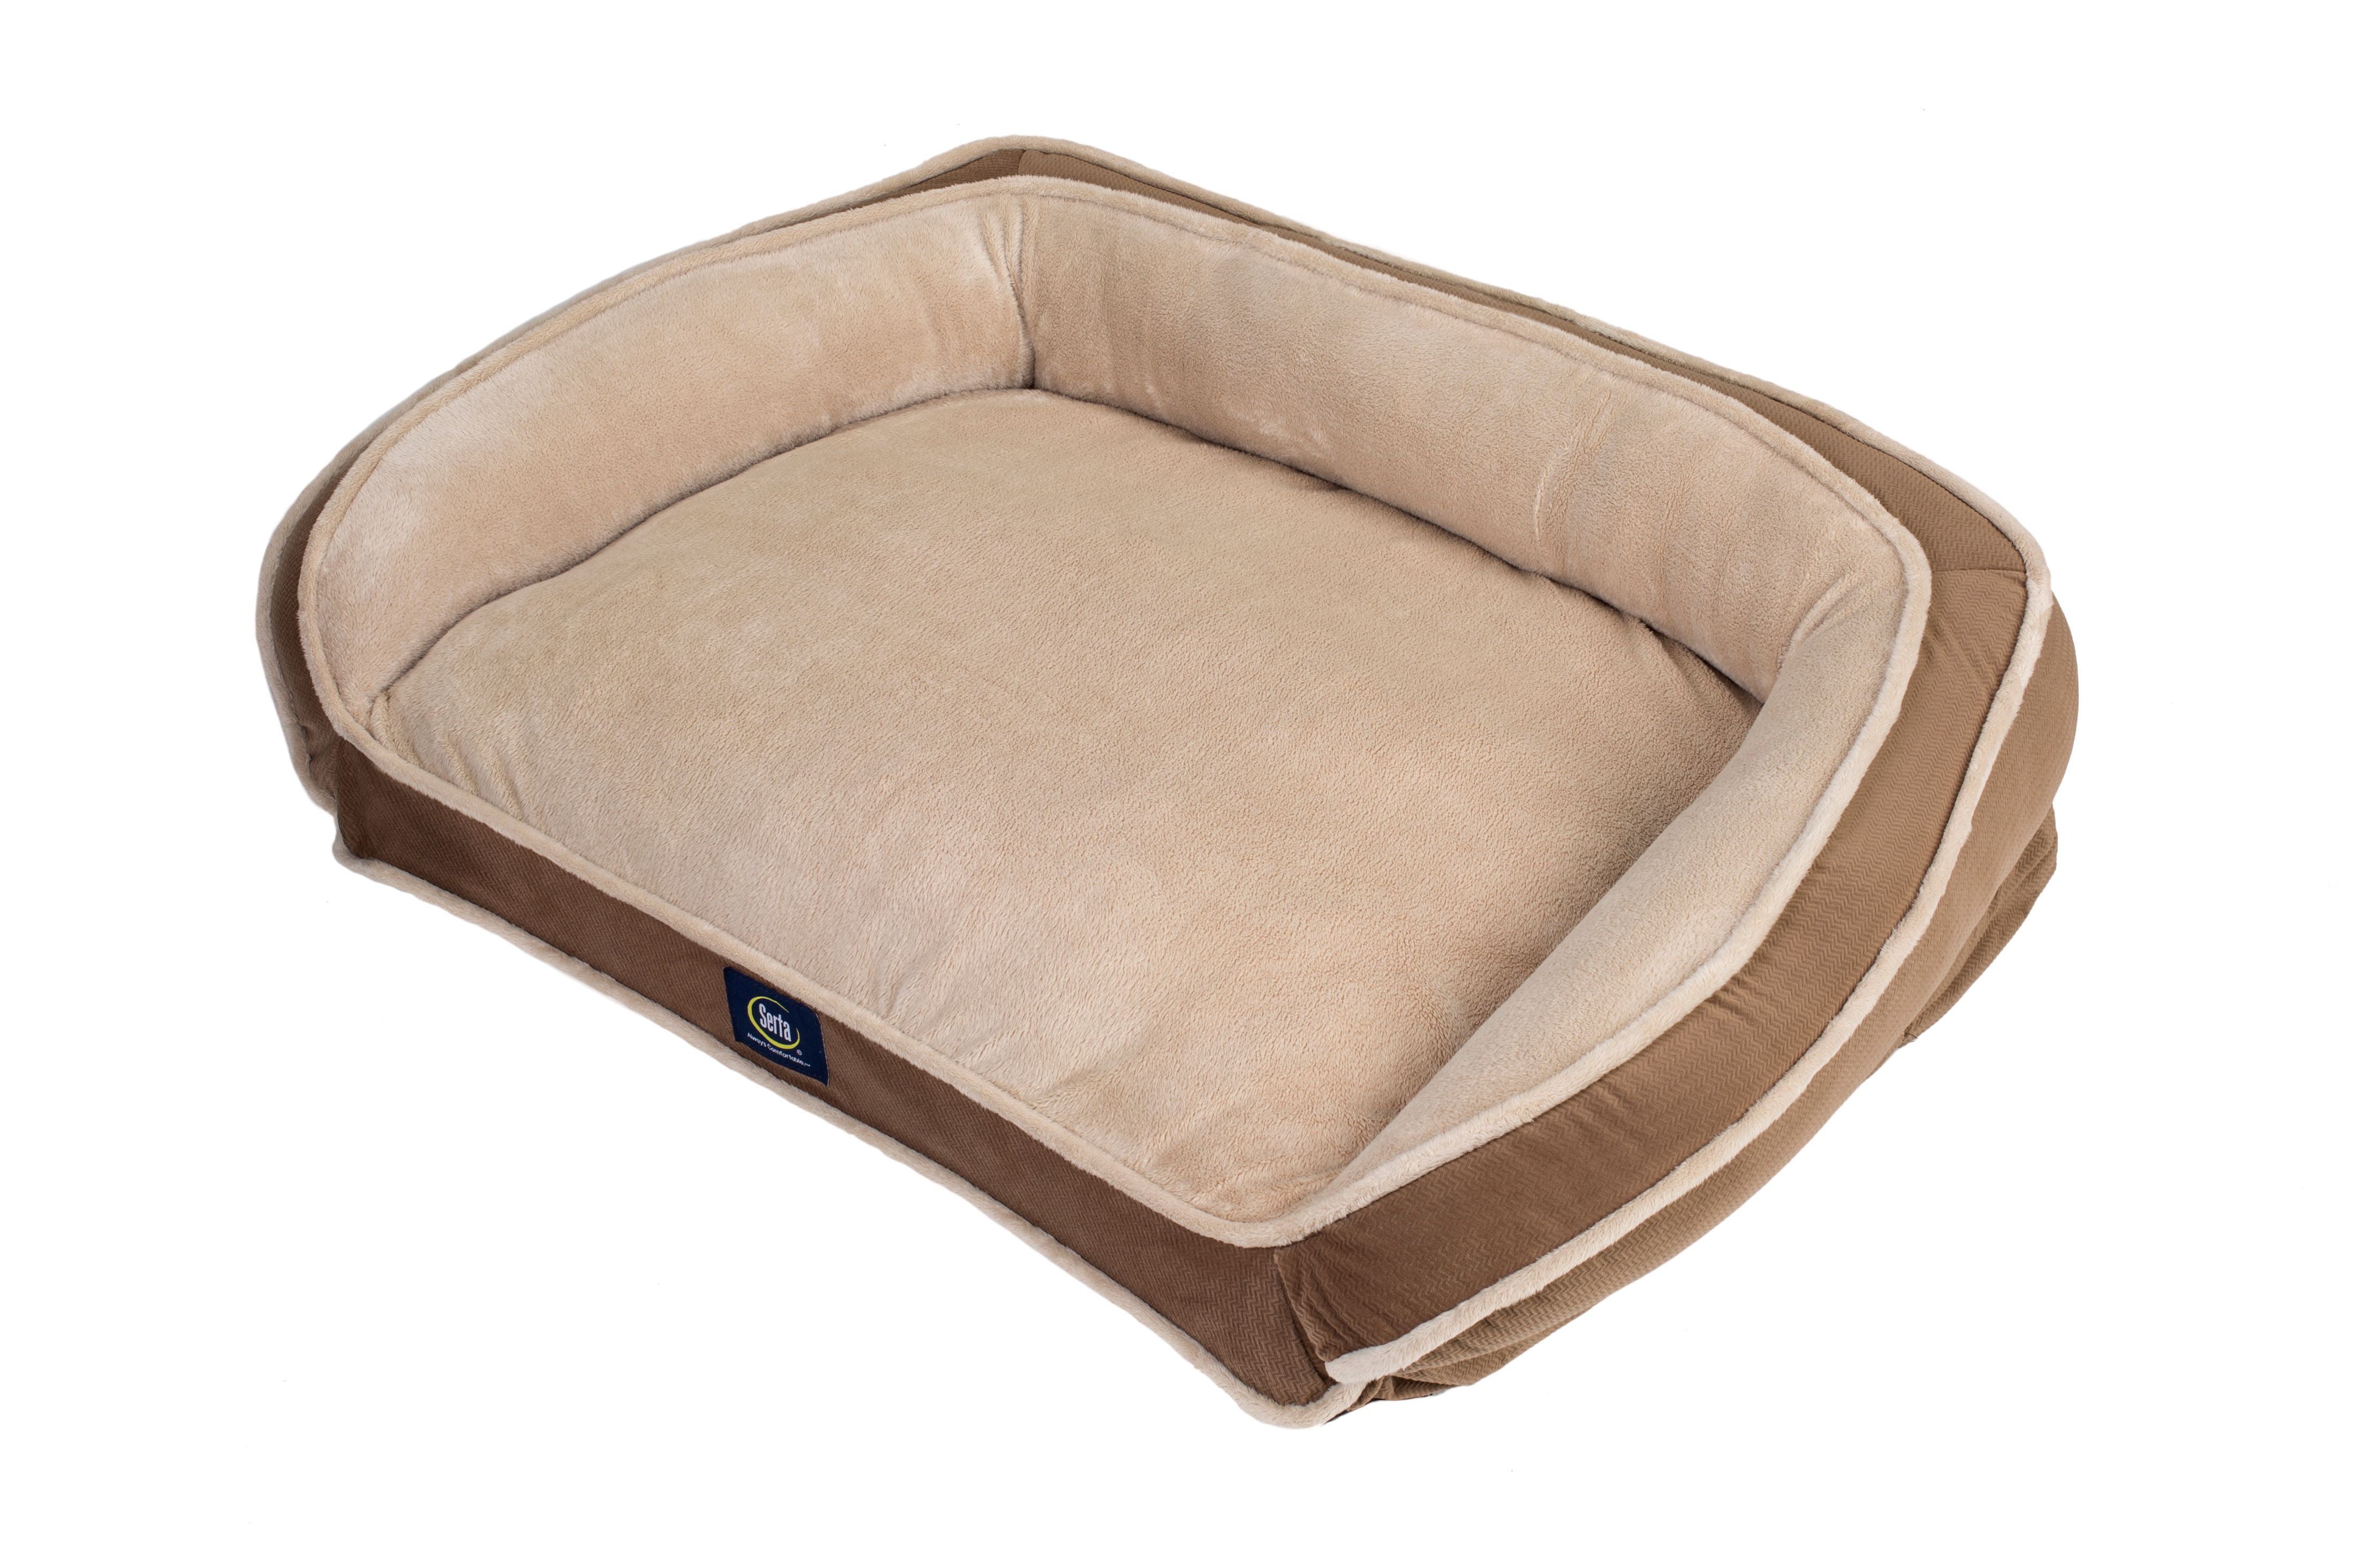 Serta Memory Foam Couch Pet Dog Bed, Large, Color May Vary - Walmart